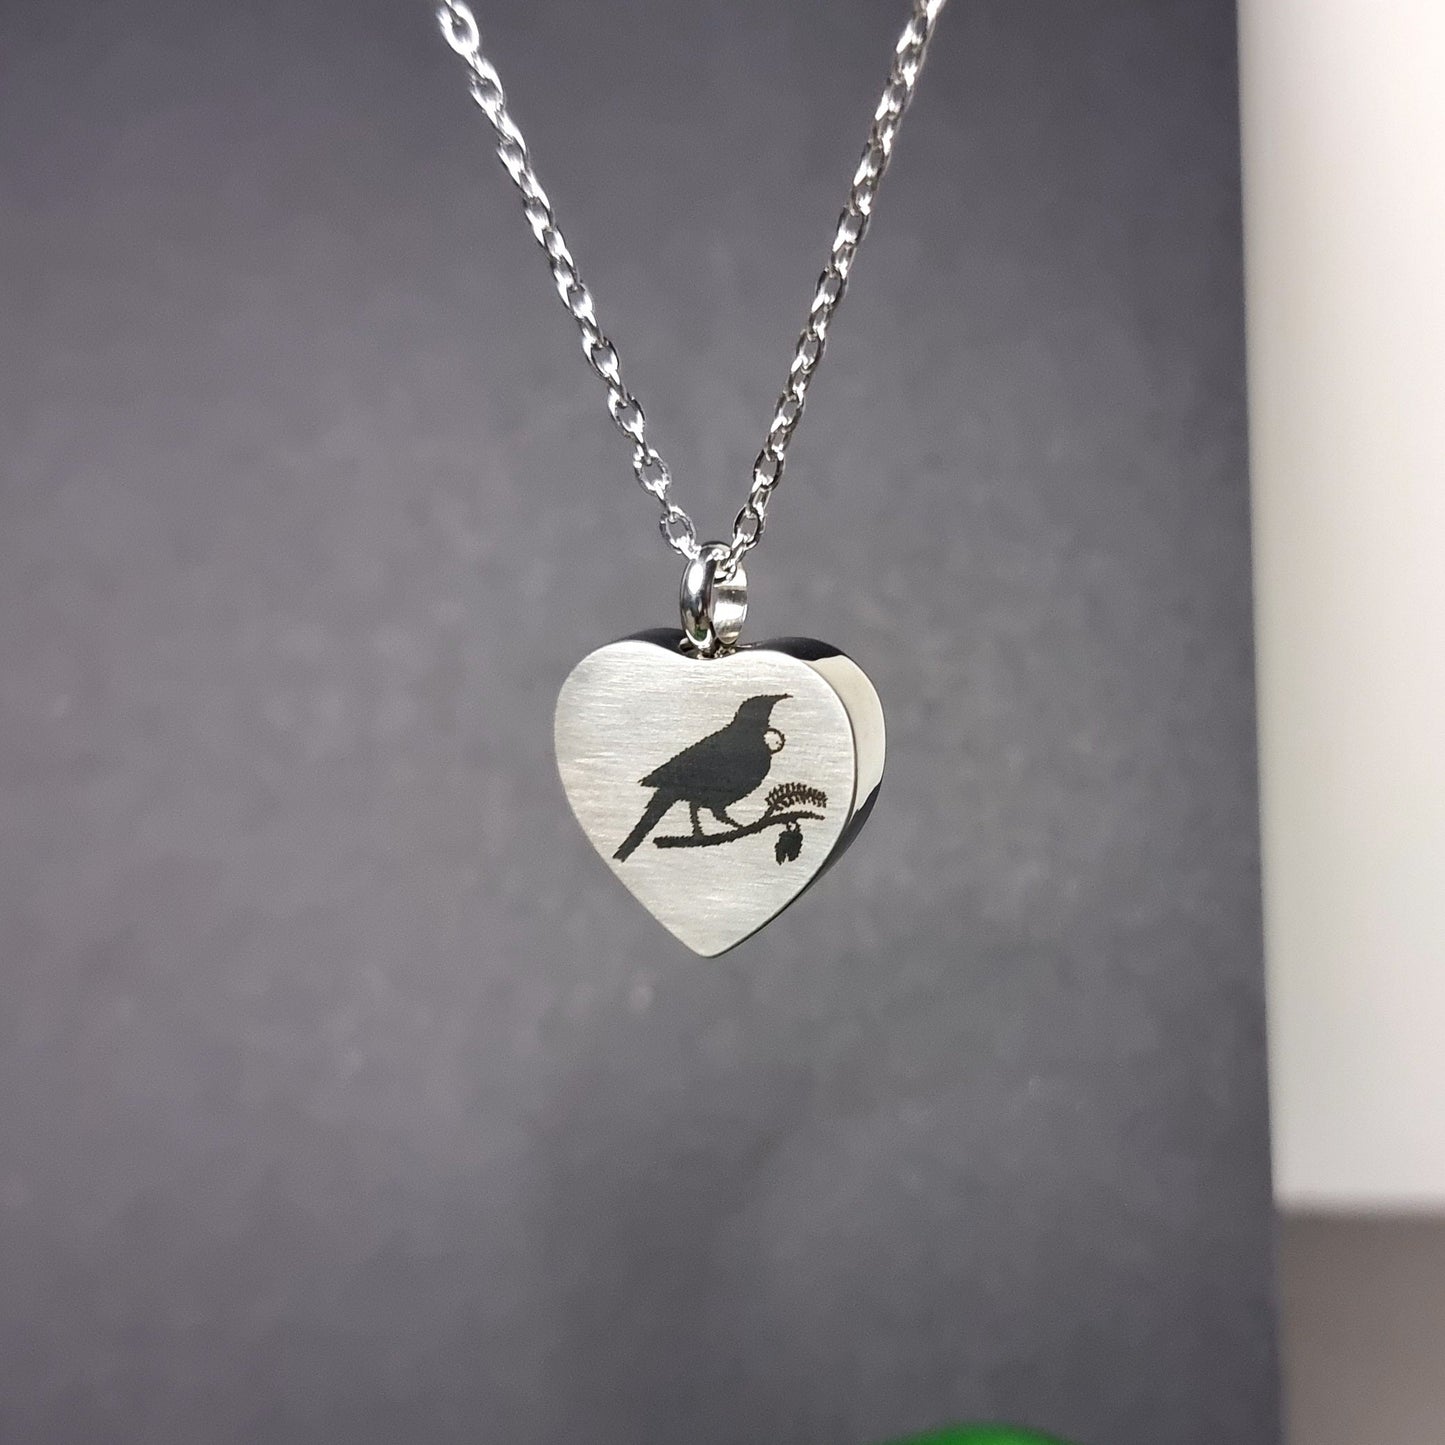 Tui Engraved Keepsake Memorial Necklace Urn for cremation ashes or pet hair